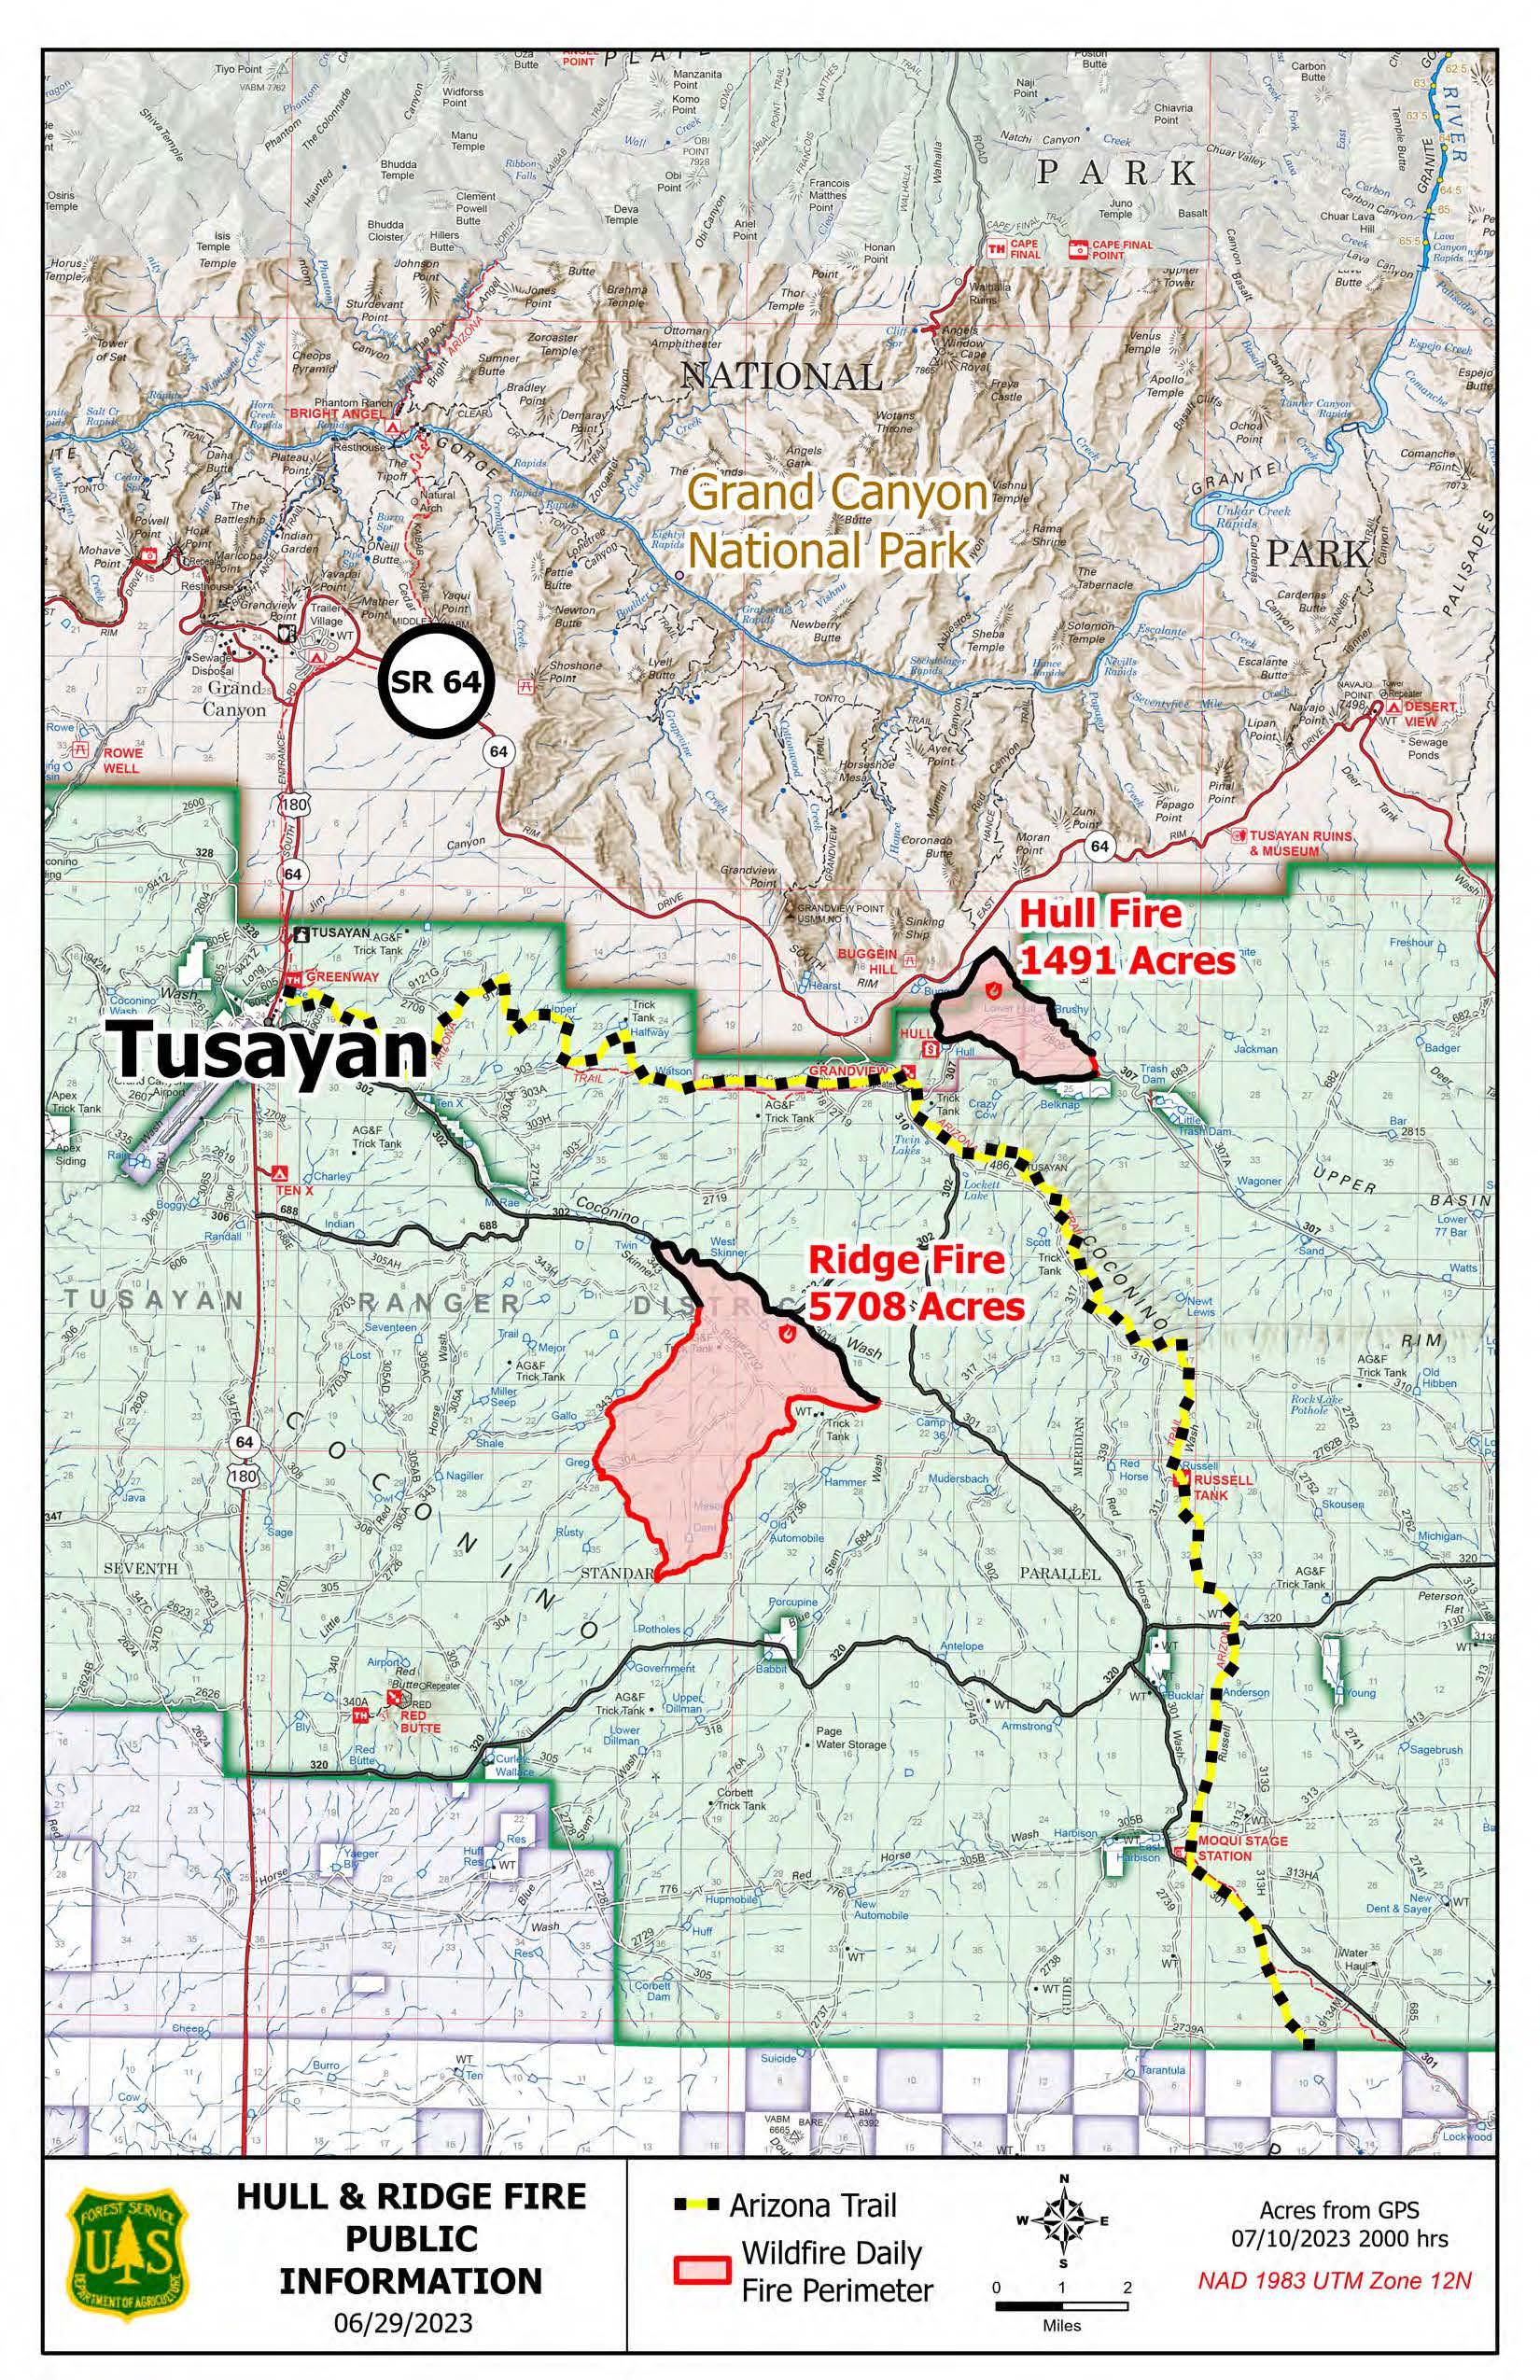 Map of the Ridge Fire and Hull Fire area for 7/11.